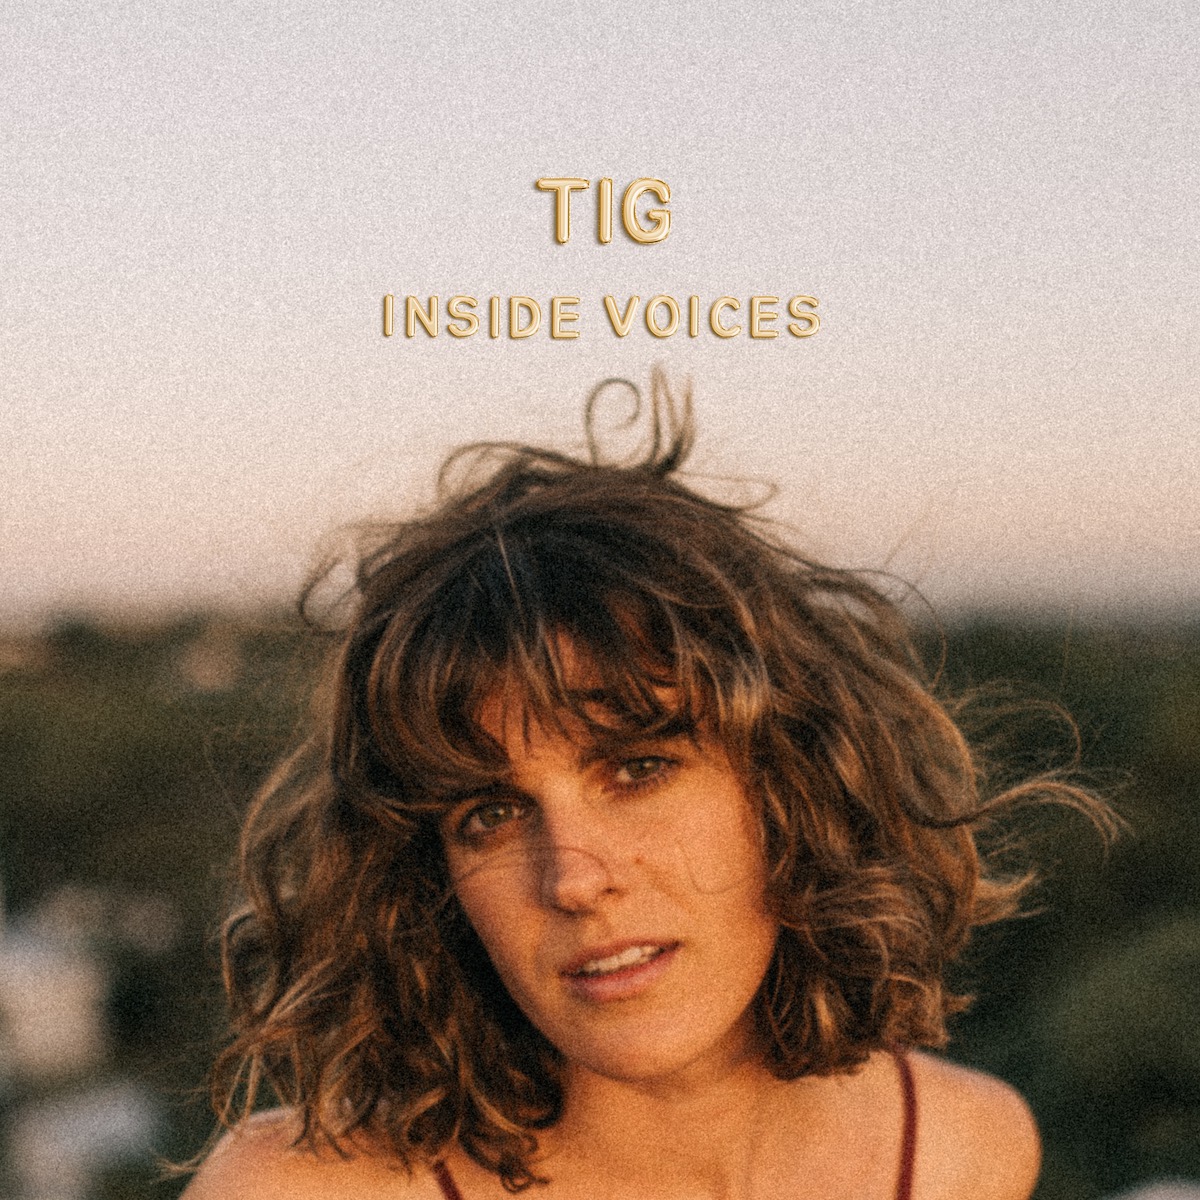 DEBUT EP REVIEW: Inside Voices by Tig